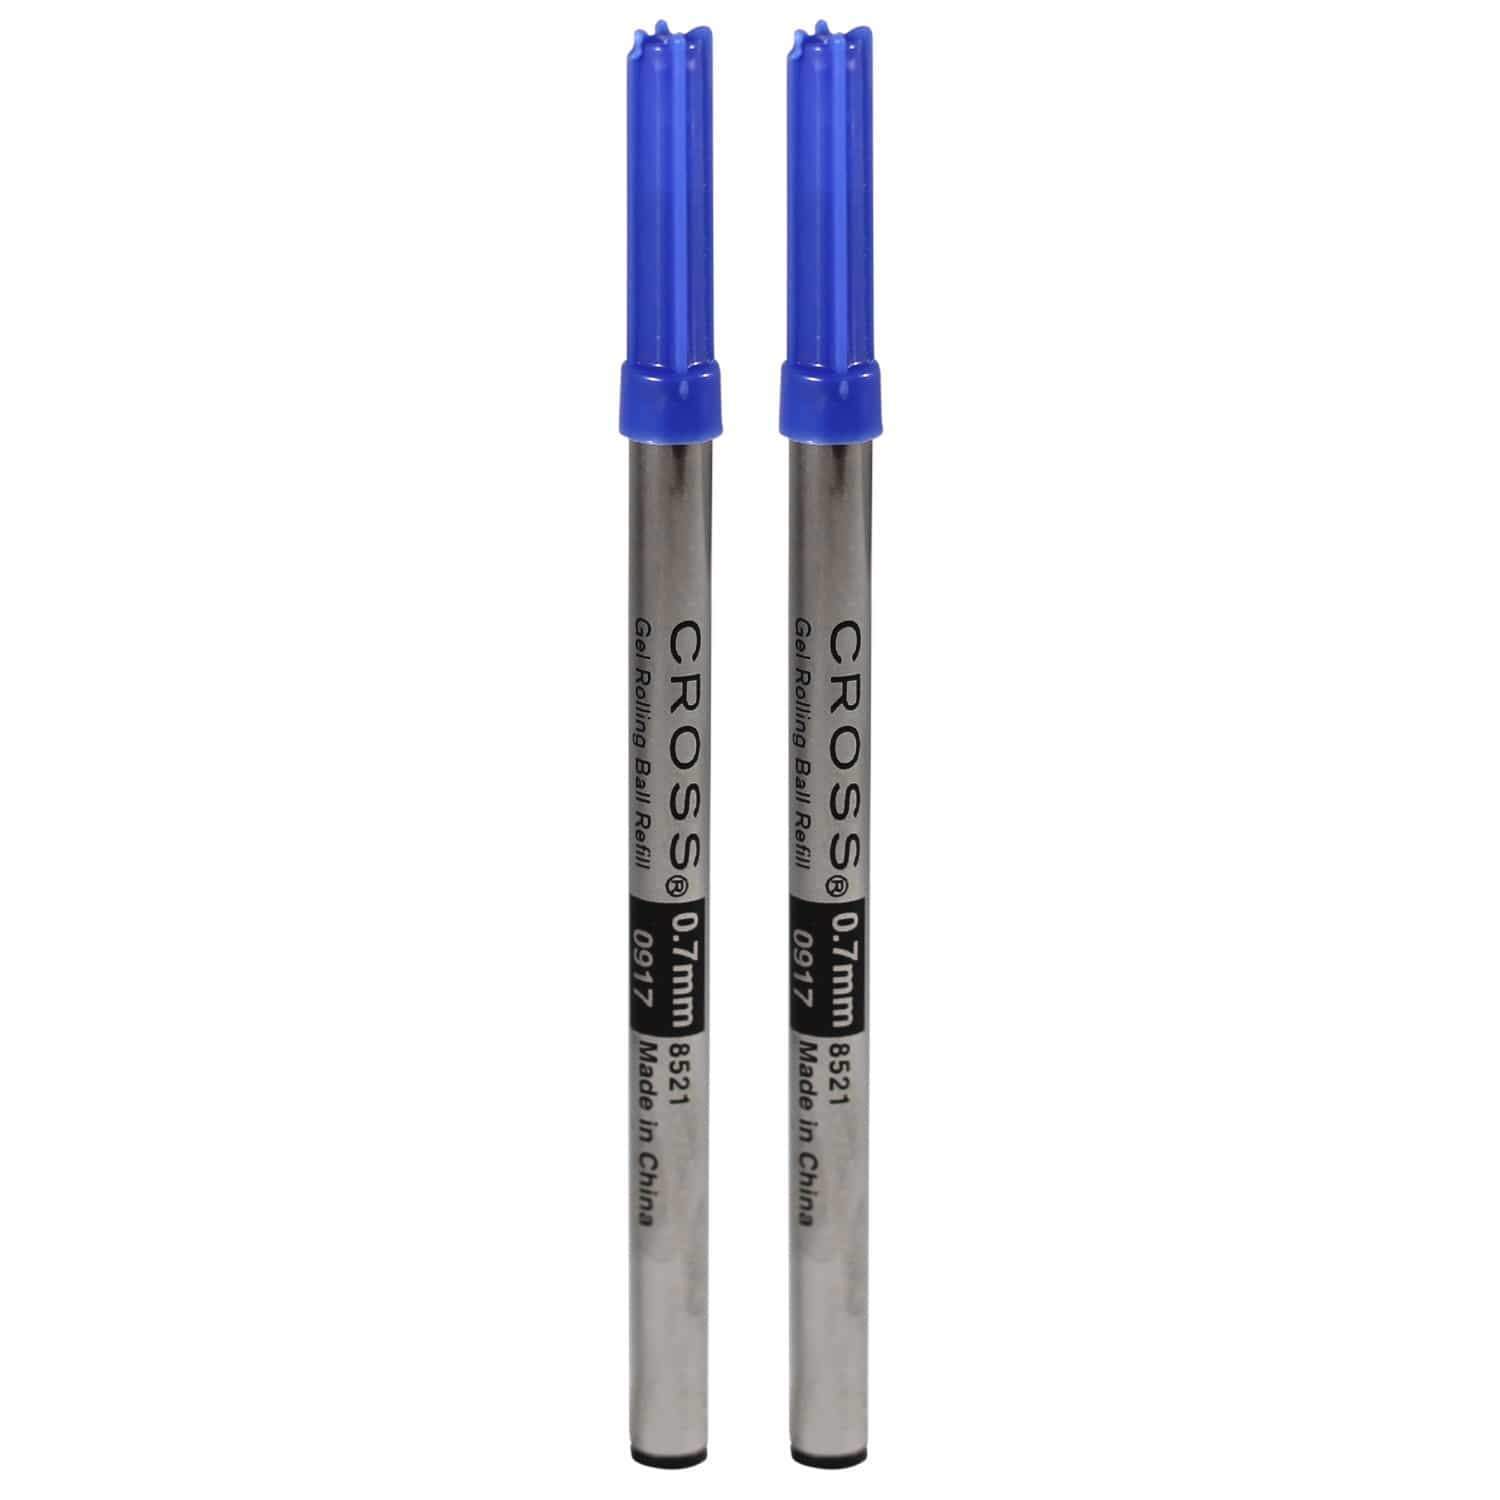 Cross+Gel+Ink+Rolling+Ball+Refill+for+Selectip+Pens+-+Blue%2C+Pack+of+1+%288521%29  for sale online